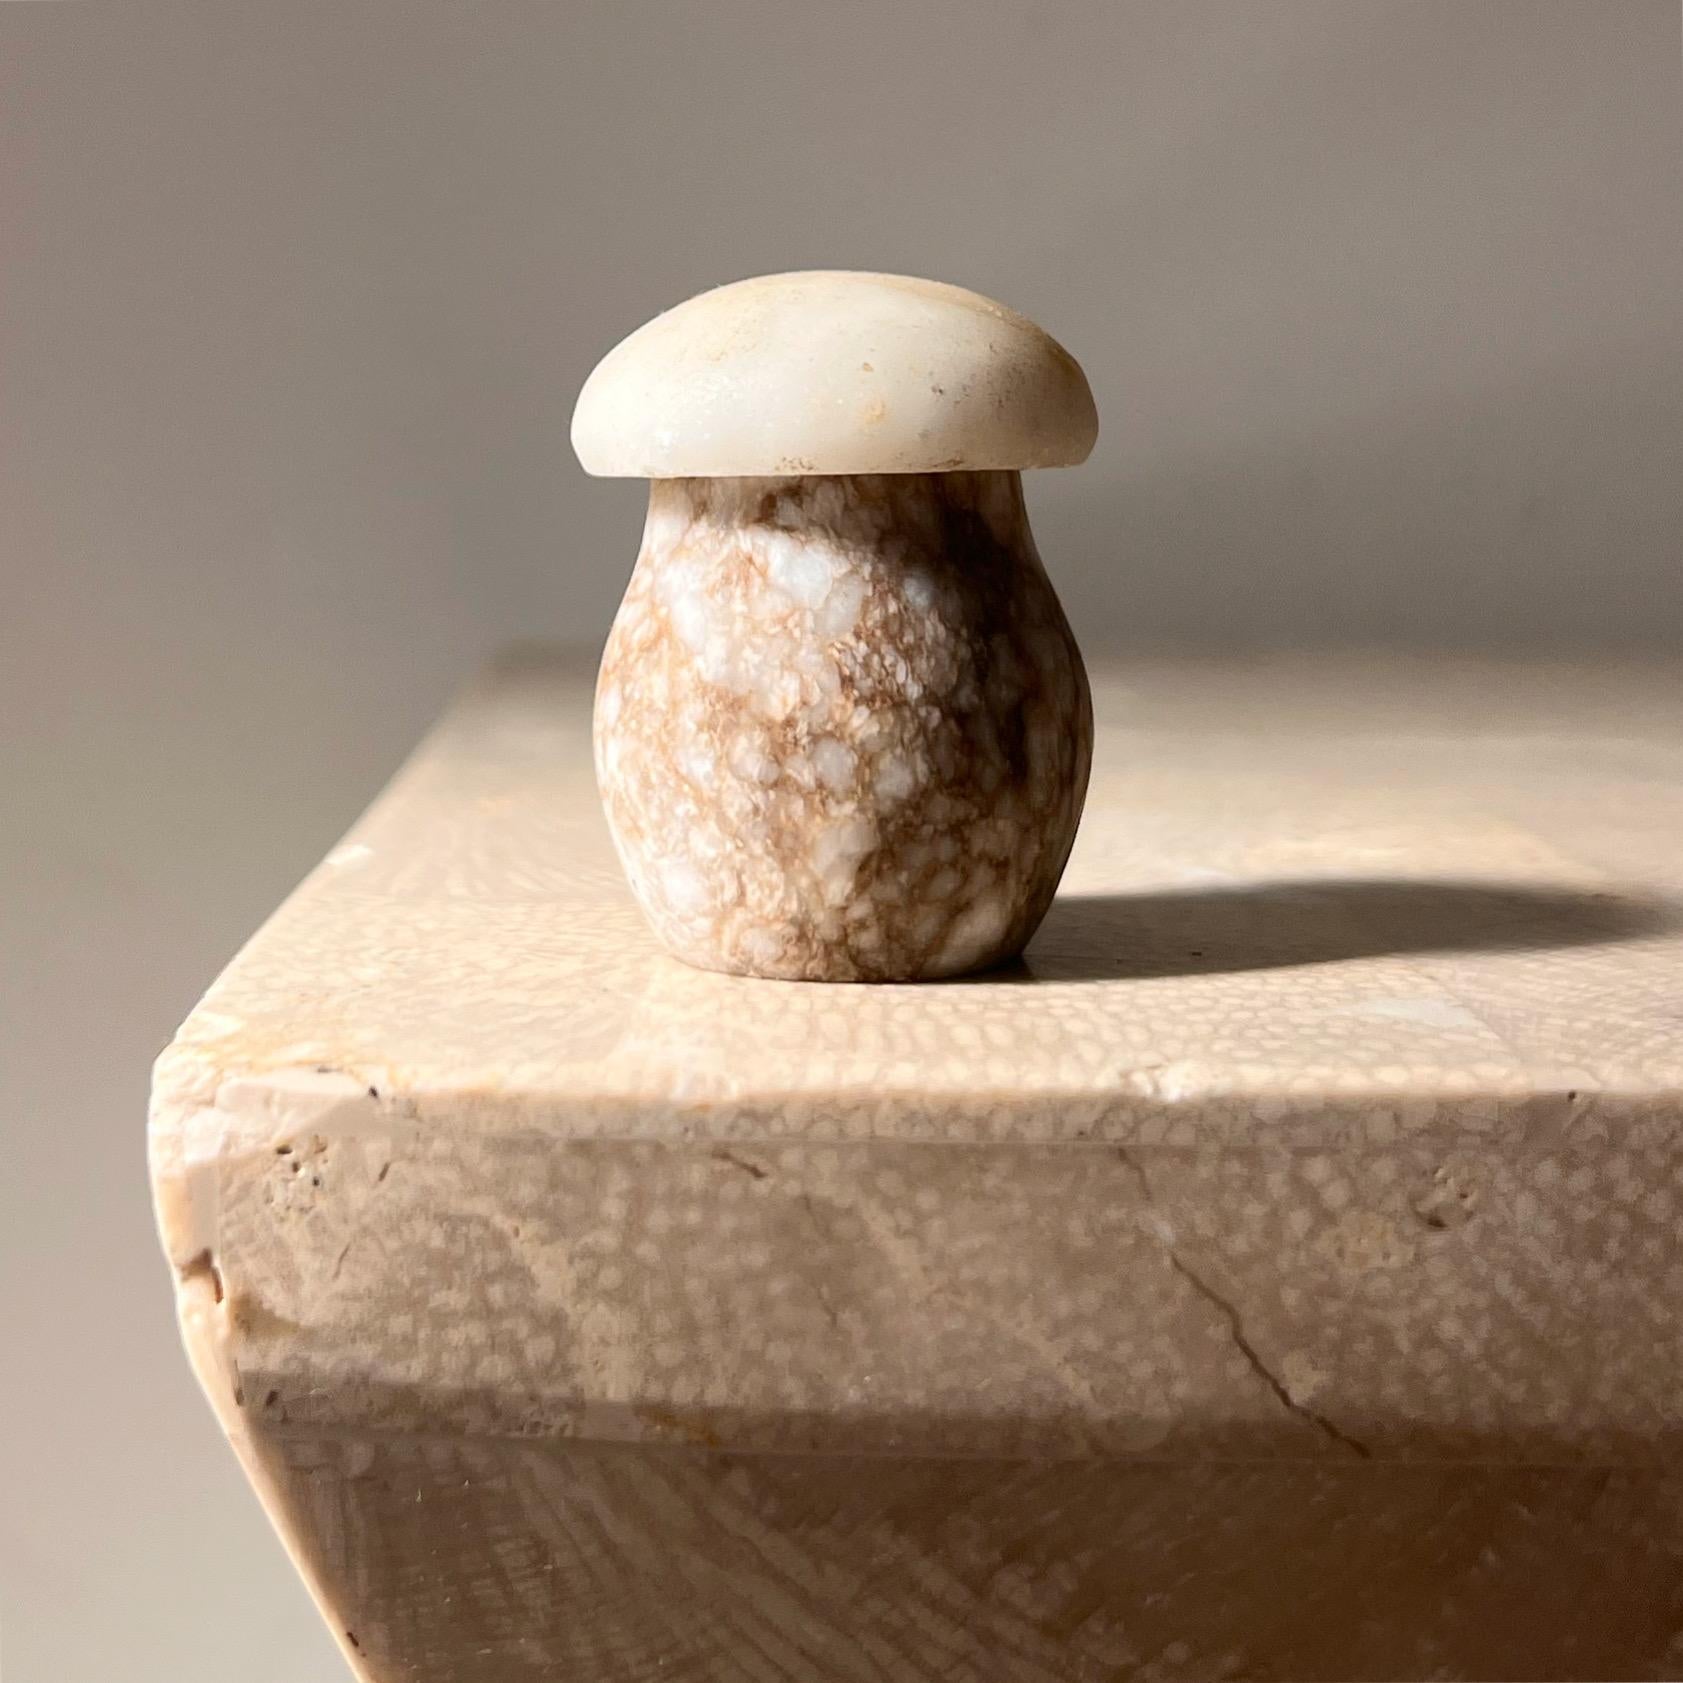 A small marble mushroom objet d’art whose cap pops off to reveal a hidden secret vestibule, mid 20th century. Hand-carved in Italy circa 1960. Tones of beige, taupe, and ivory. Perfect for holding anything little. Lovely as a unique gift. Pick up in